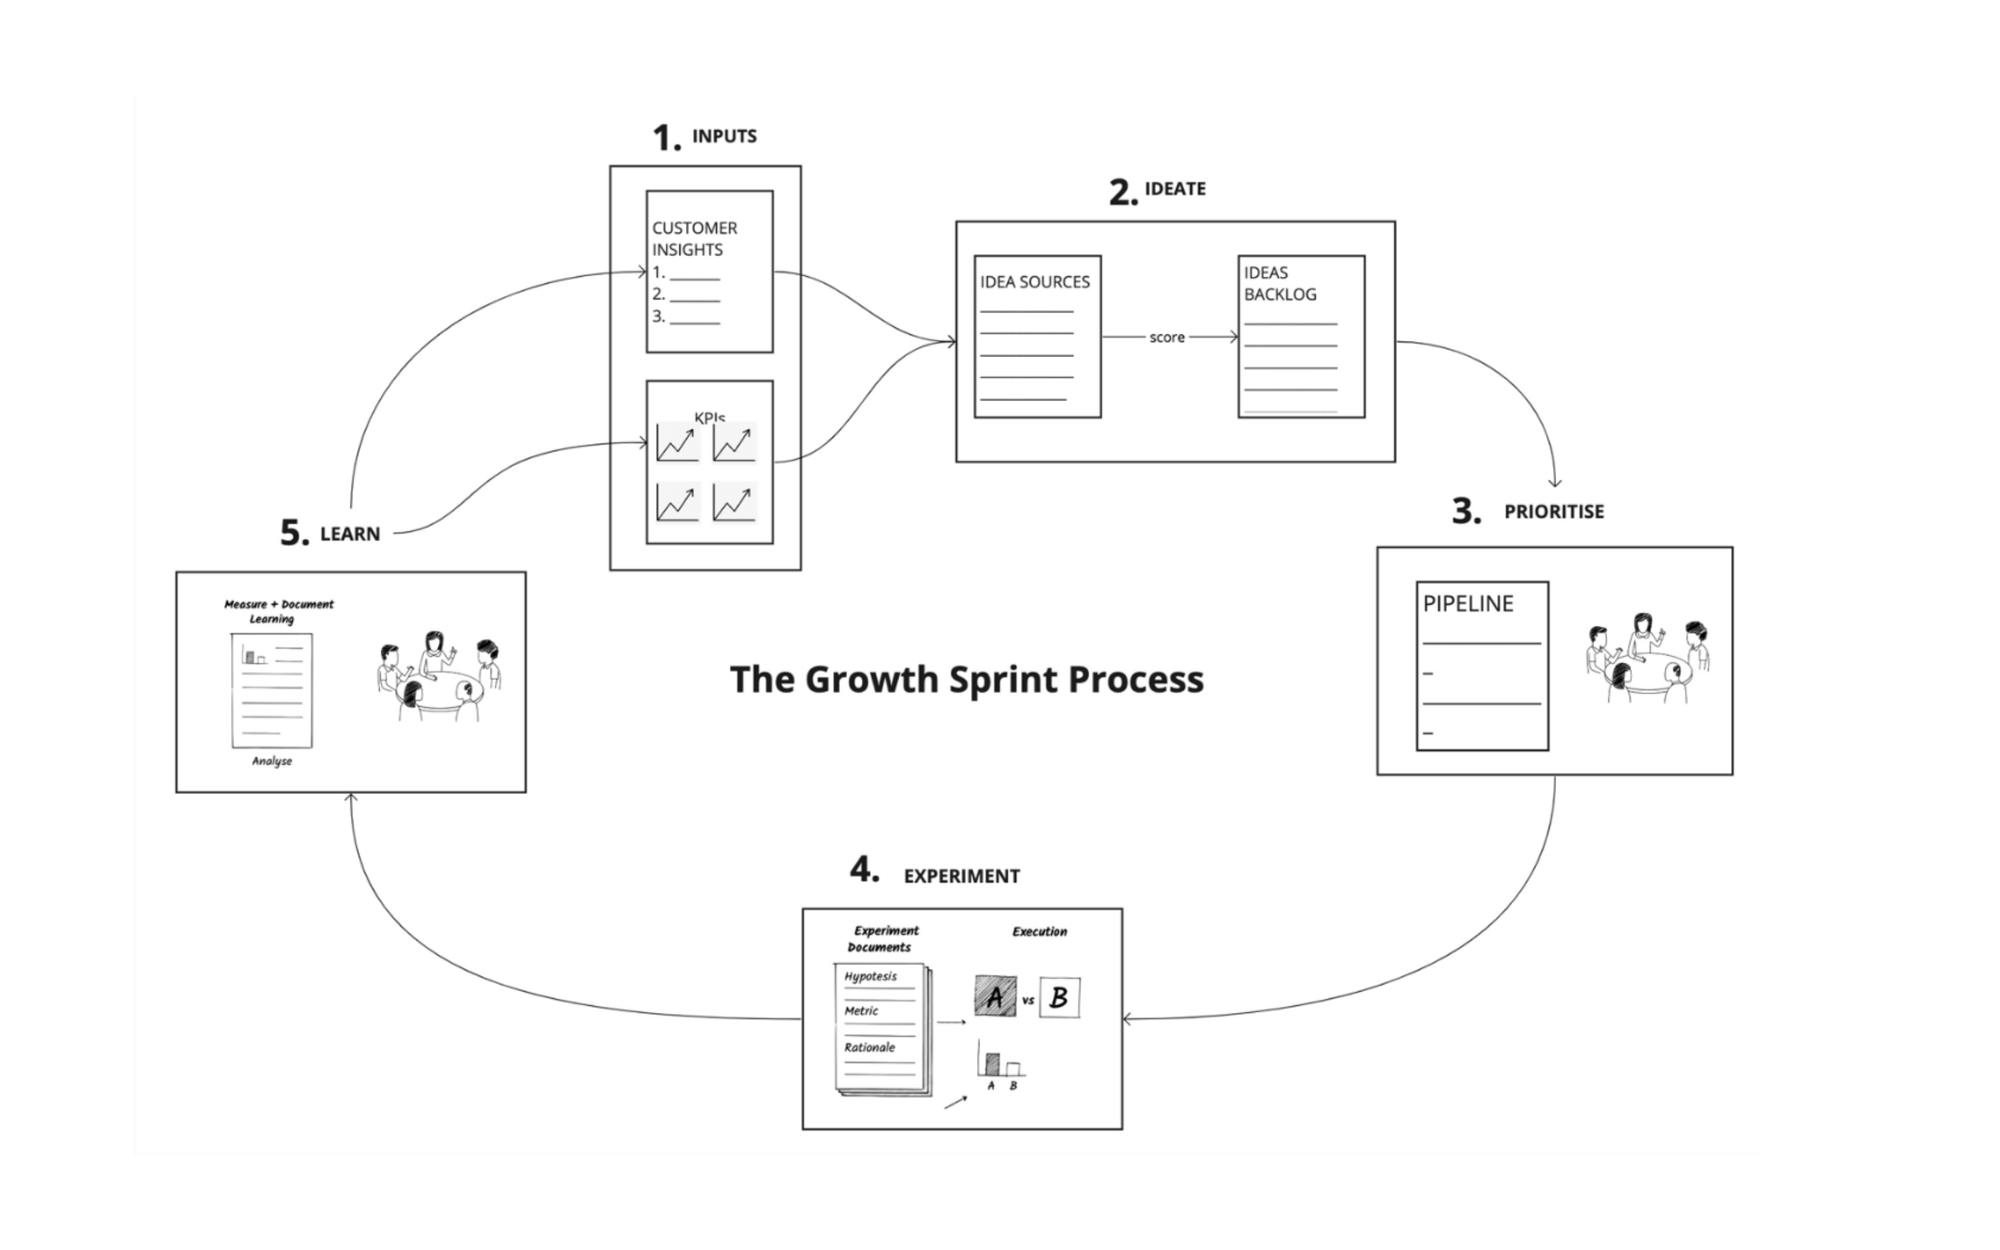 The Secret to Running Effective Growth Sprints — Follow This Process to Learn Faster